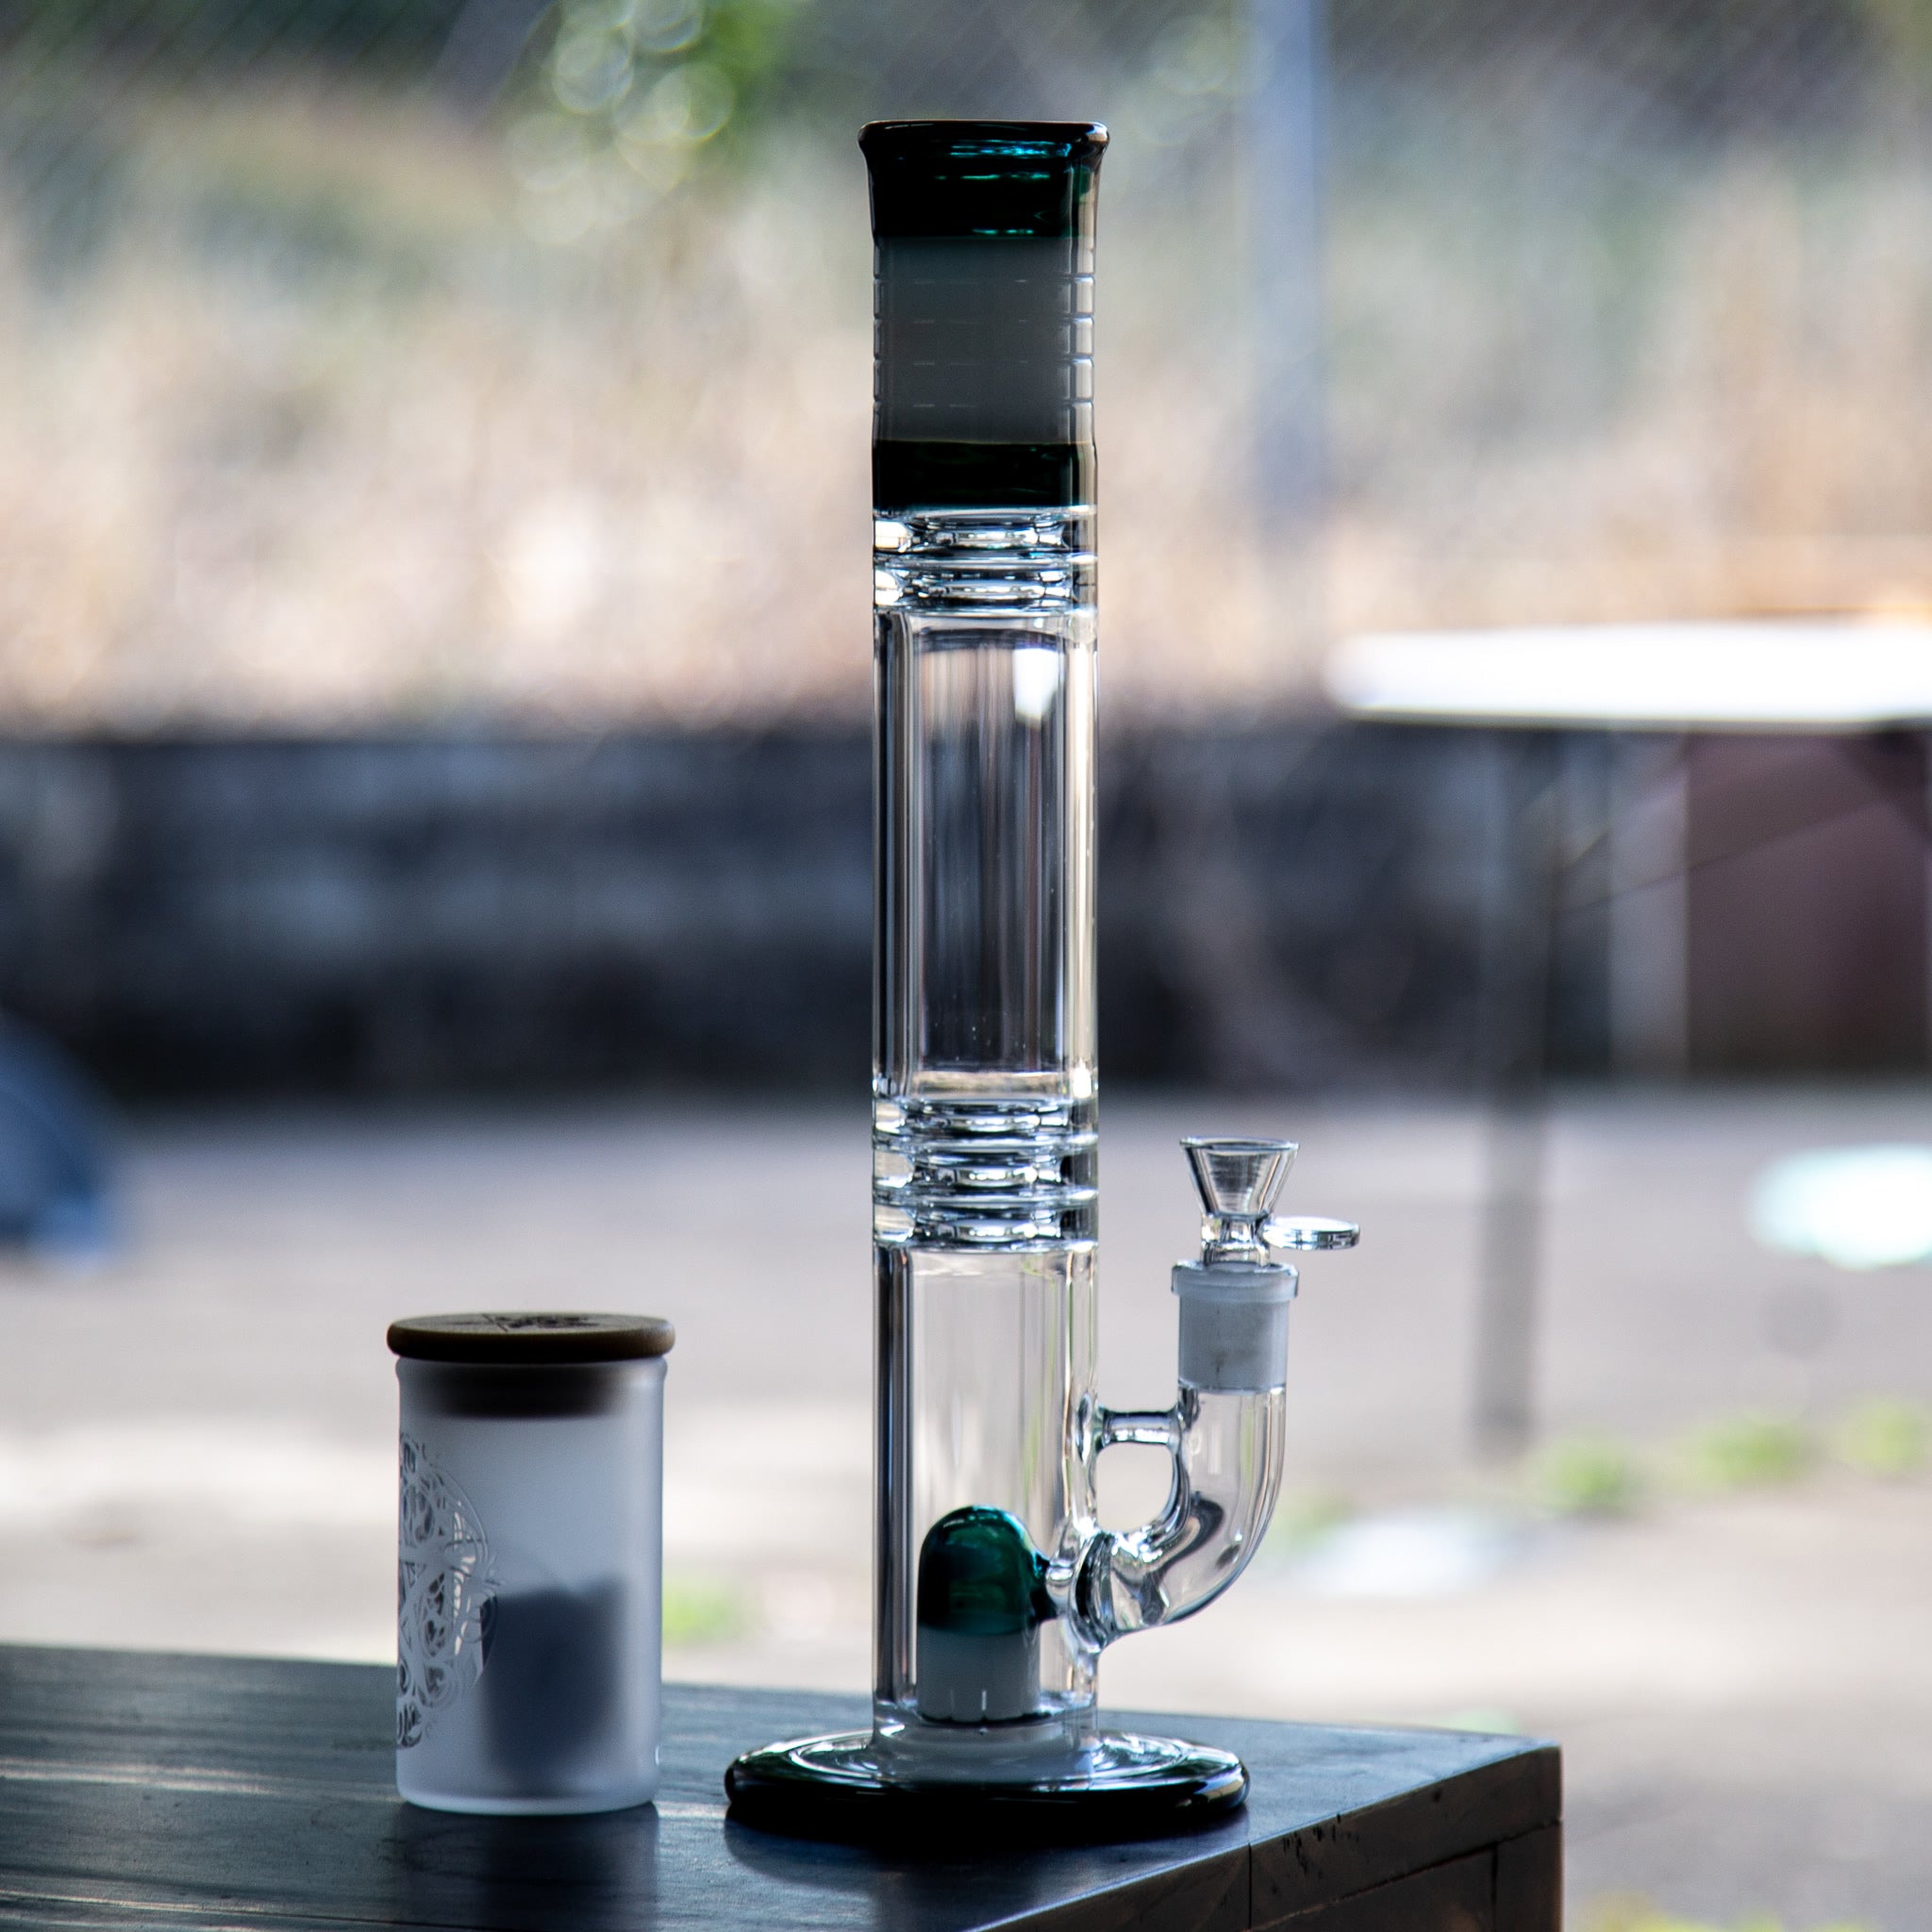 Straight glass bong with coloured glass and stemless design.